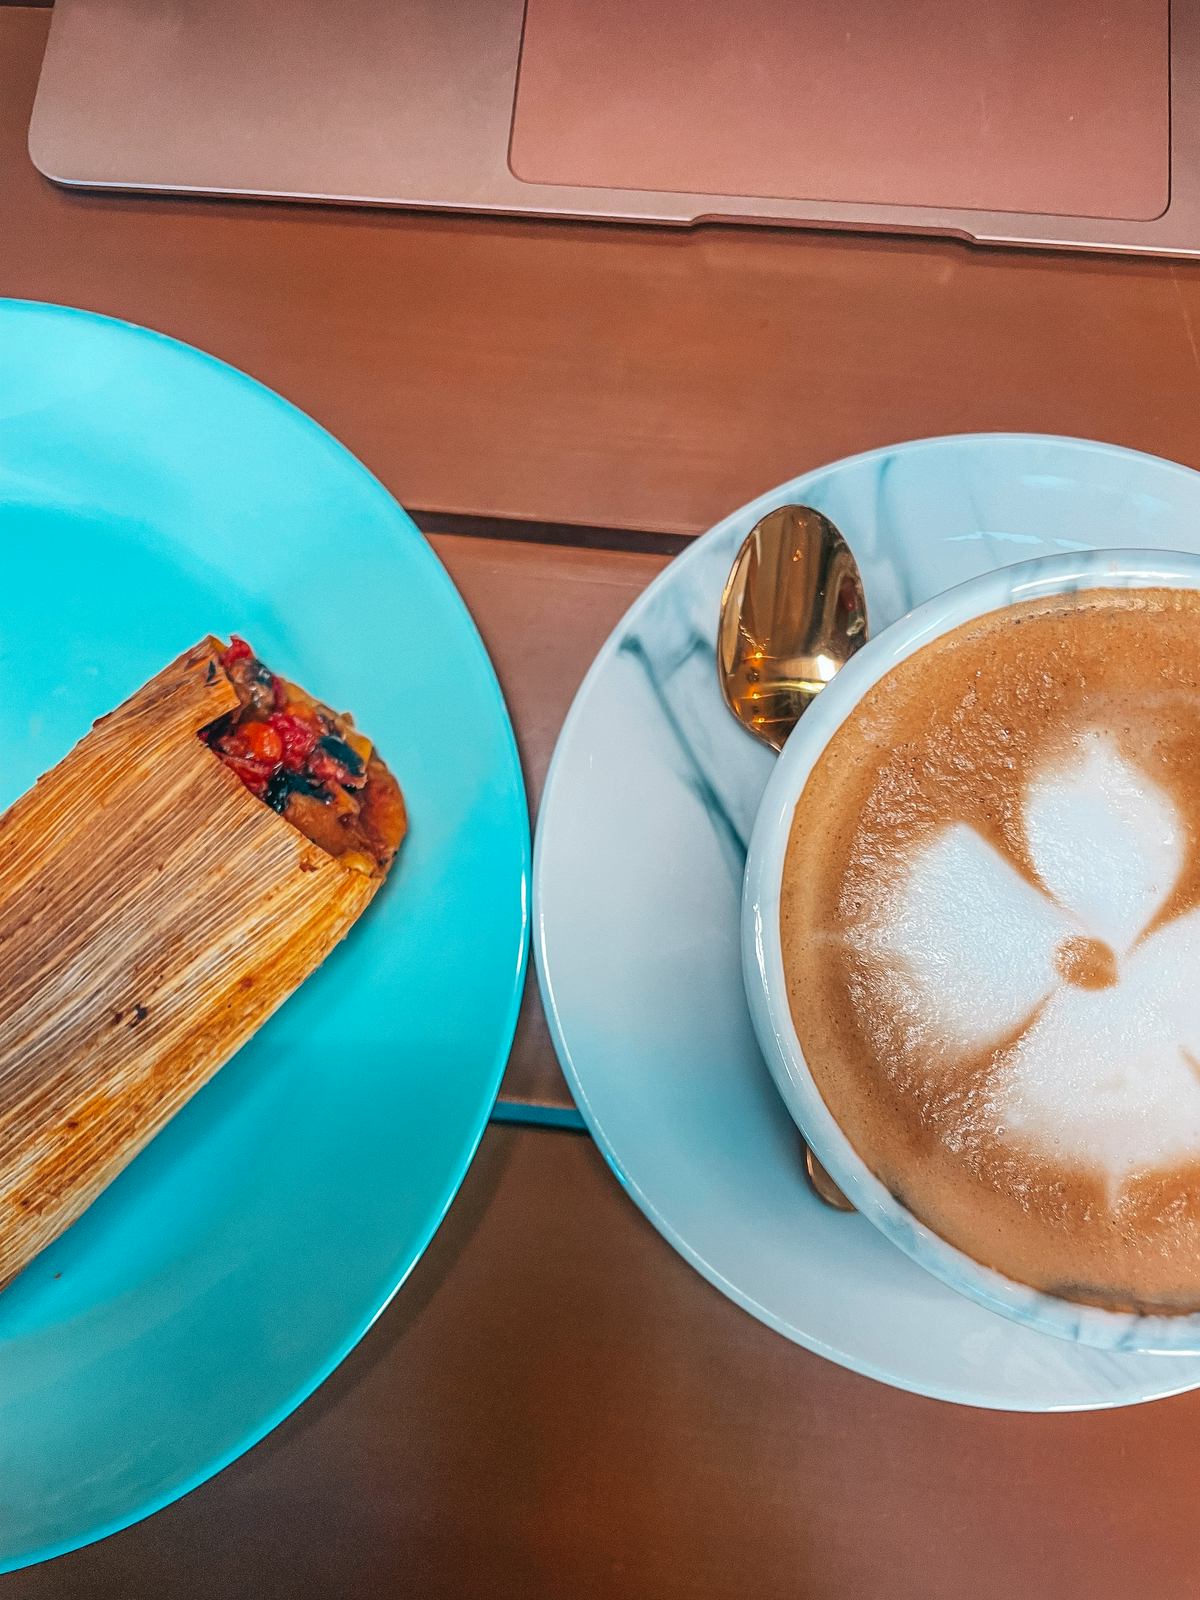 Cappuccino and vegan tamale from Lady and the Mug in Tampa